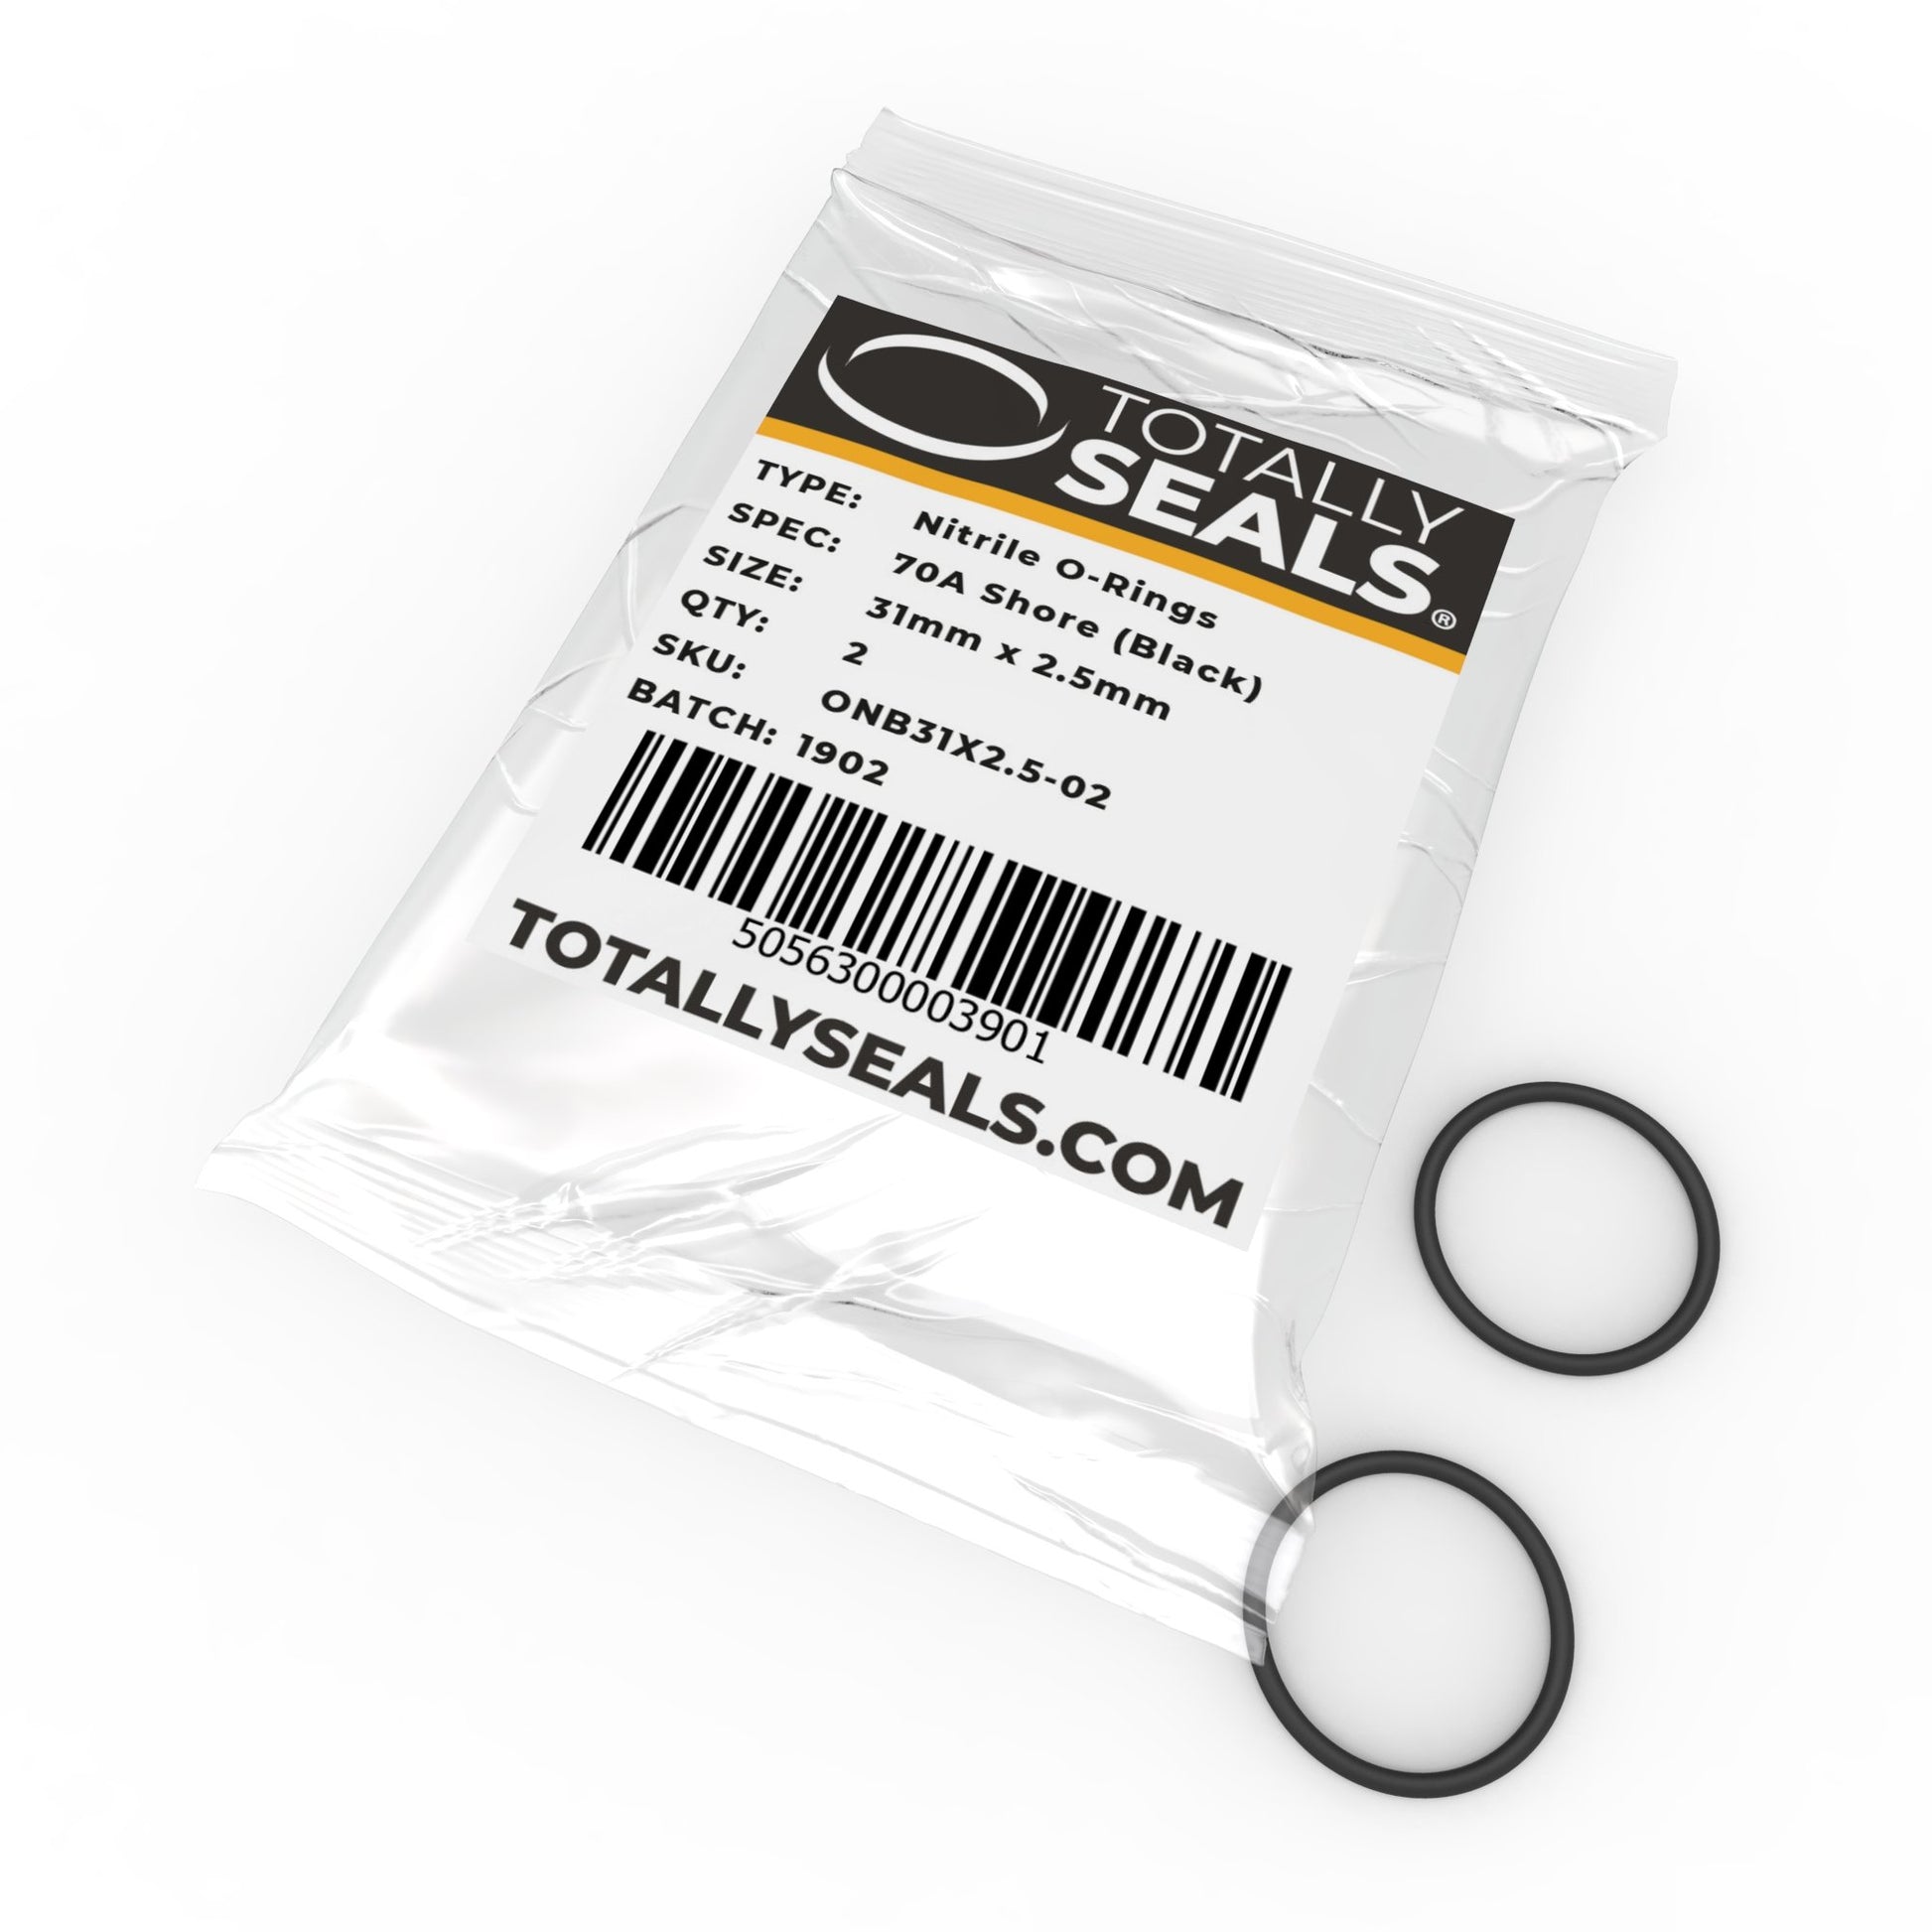 31mm x 2.5mm (36mm OD) Nitrile O-Rings - Totally Seals®